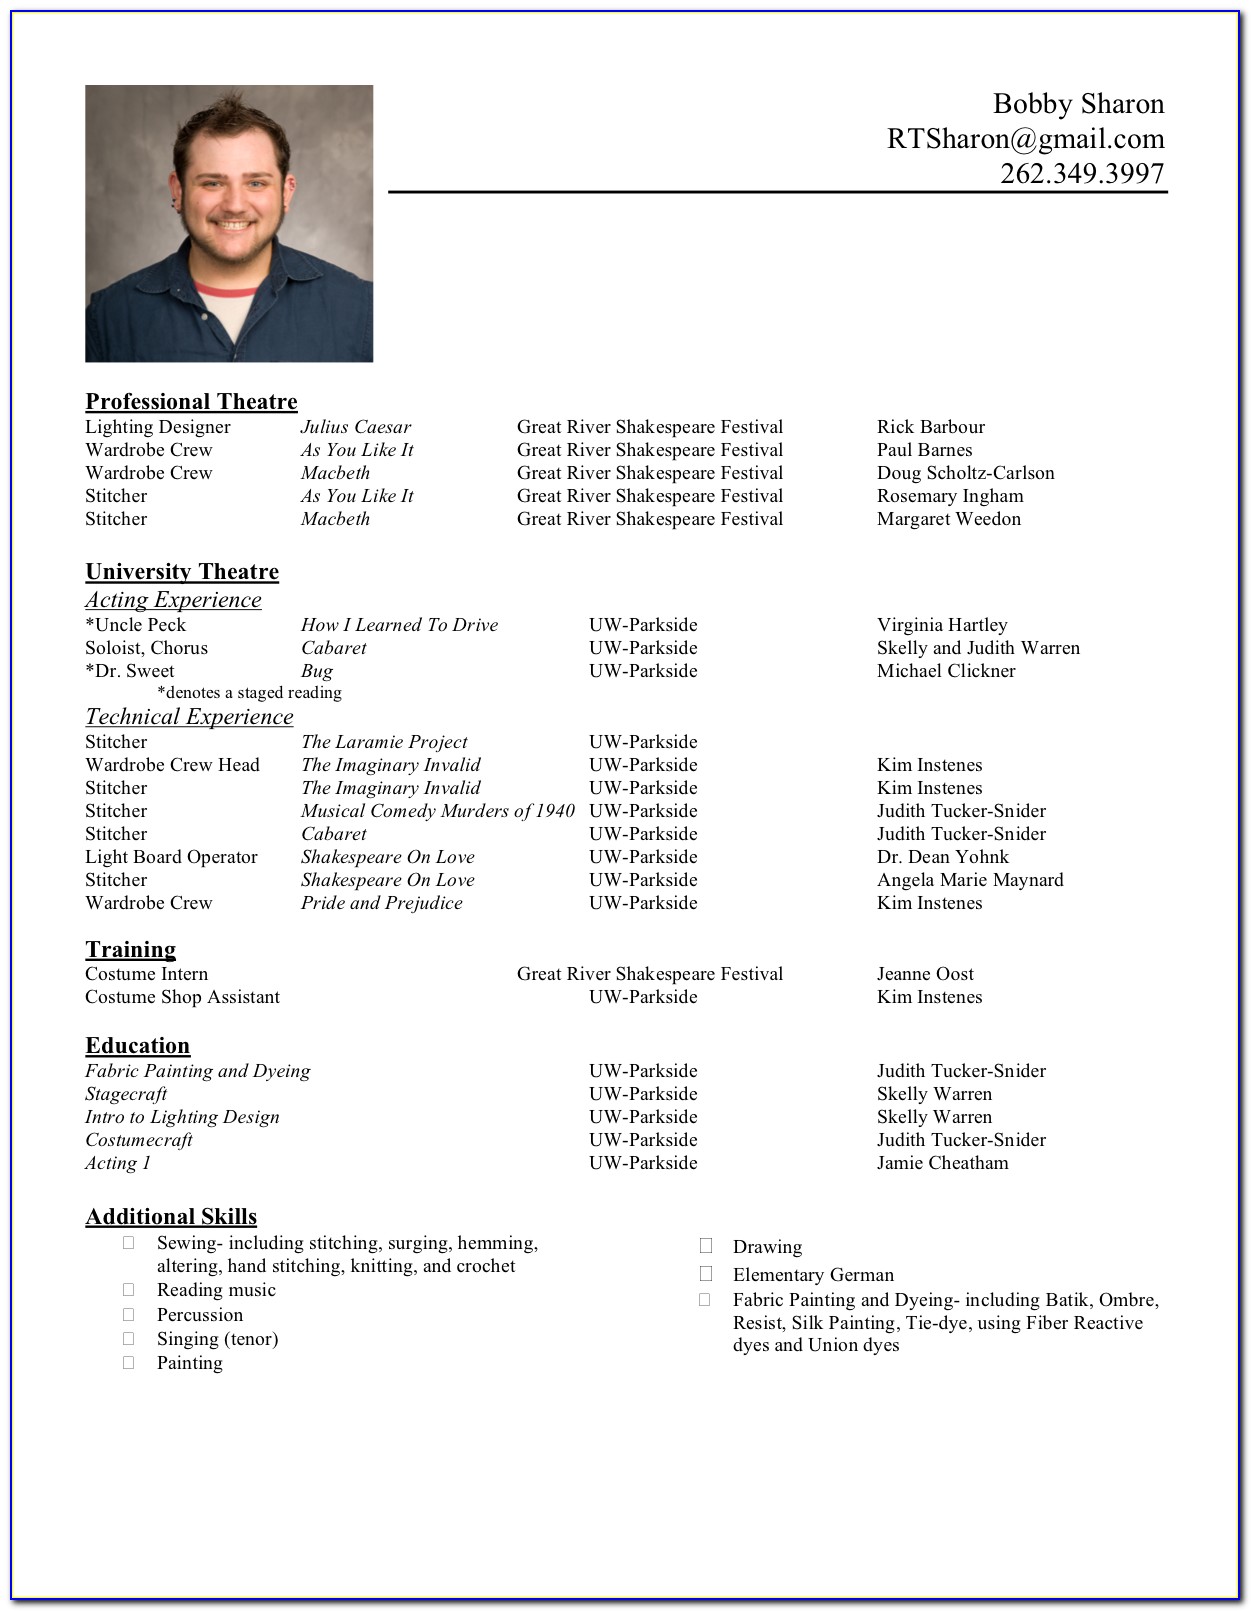 Resume Samples For Experienced Banking Professionals